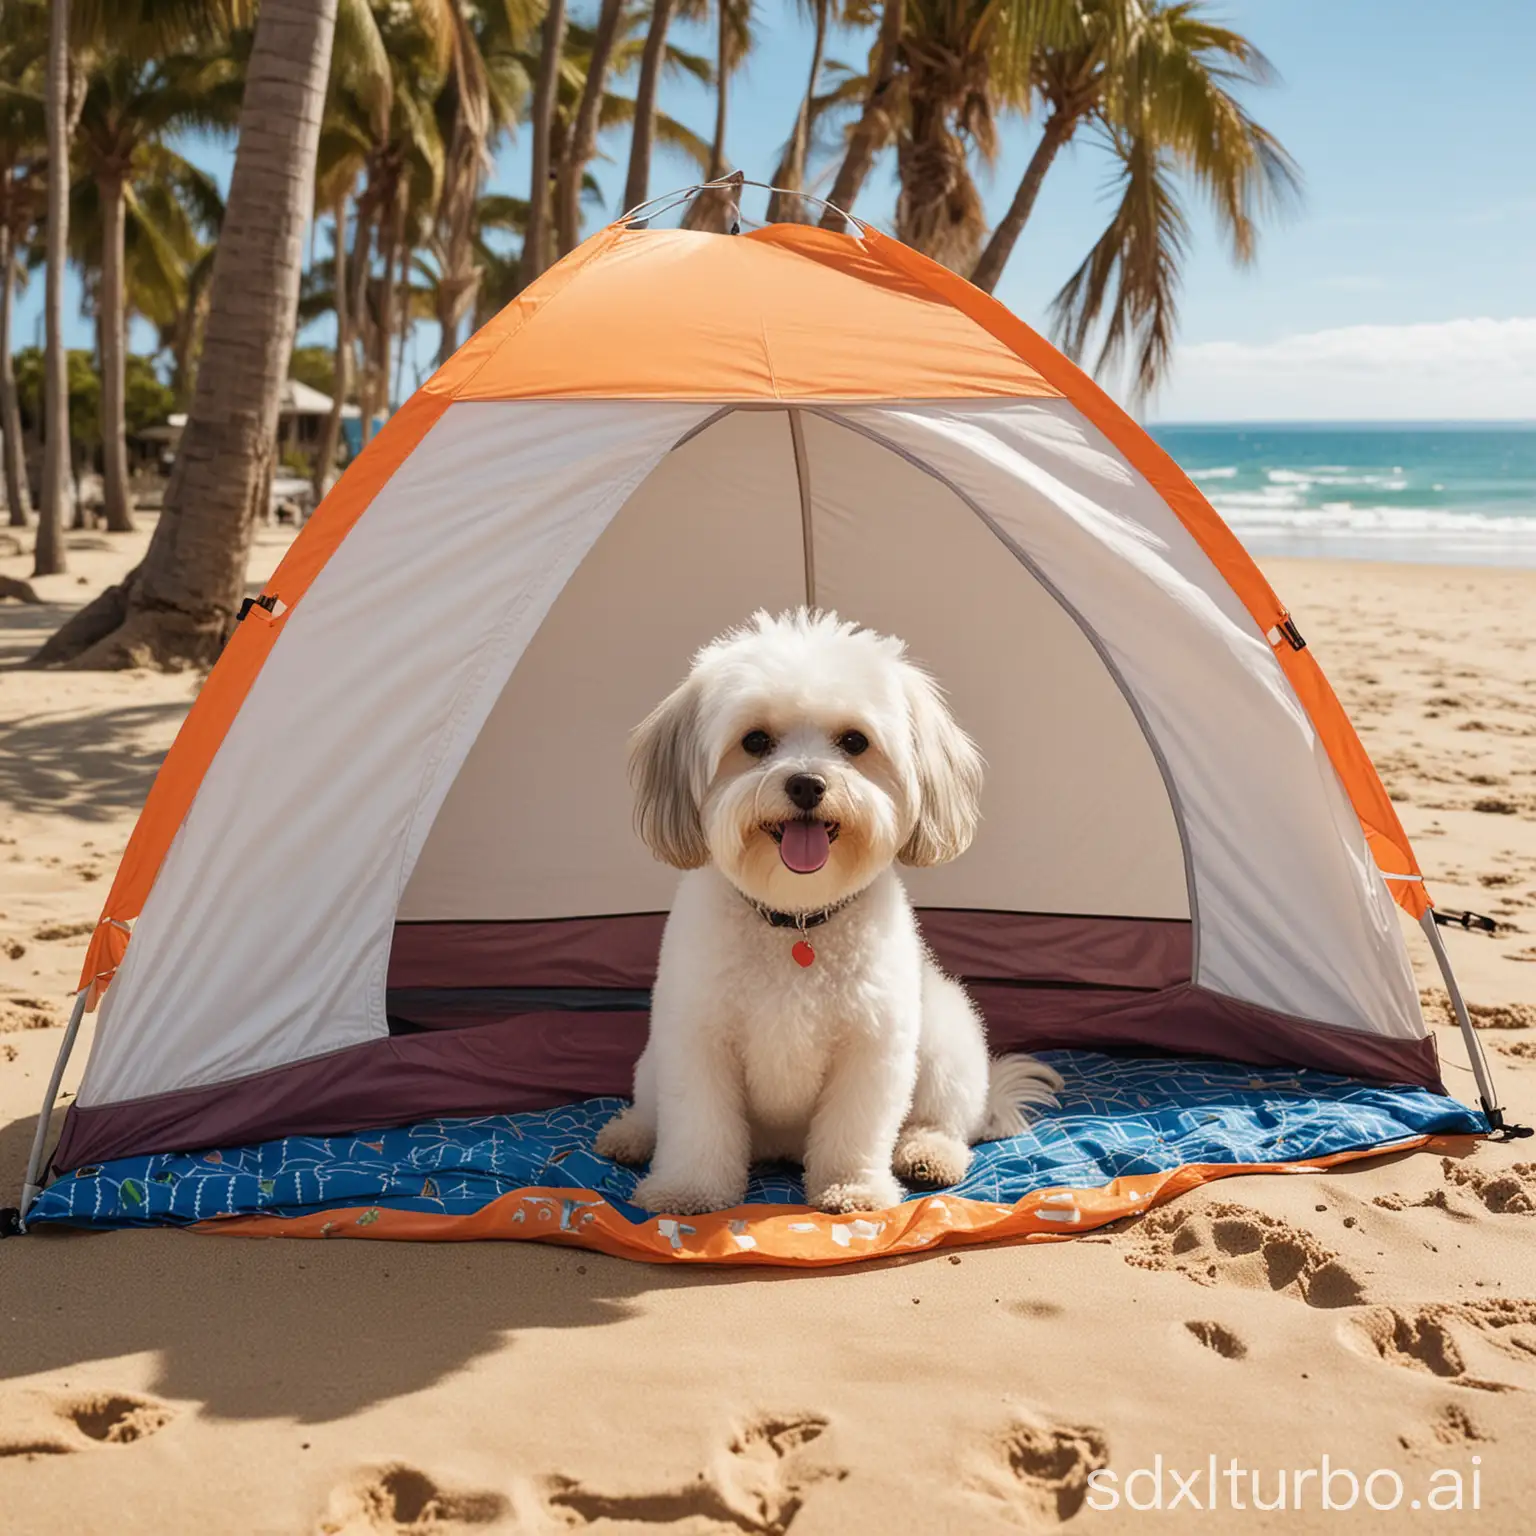 Beach-Tent-Scene-with-Playful-Characters-and-Their-Beloved-Pets